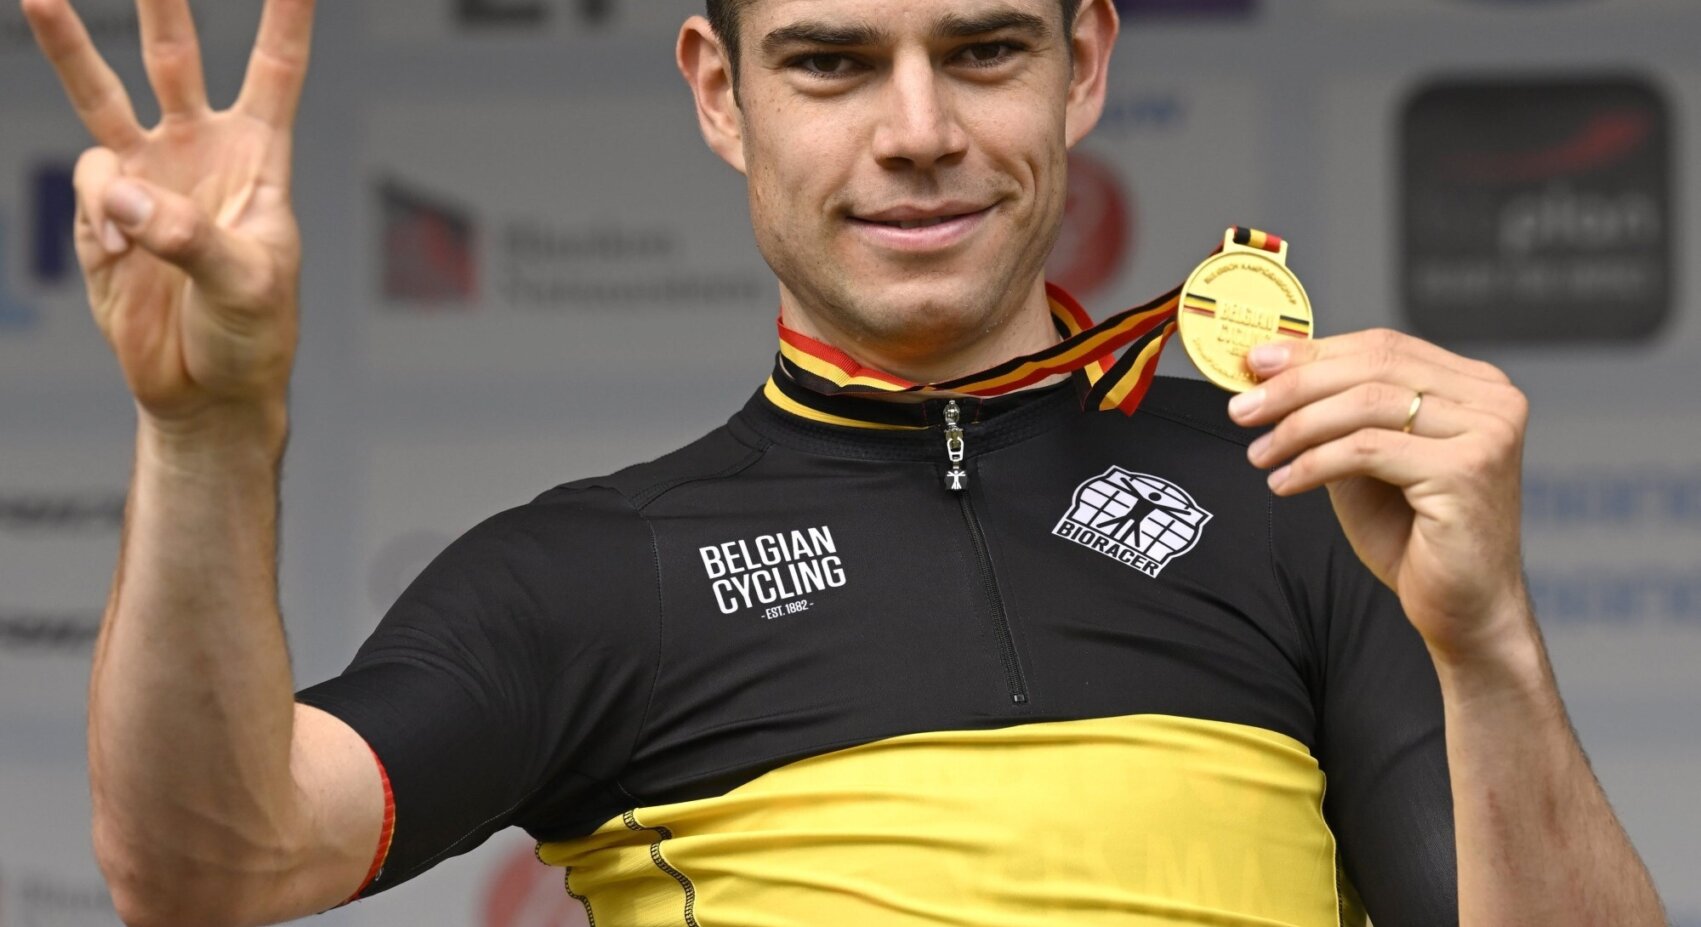 Van Aert and Valter fastest at national time trial championships	